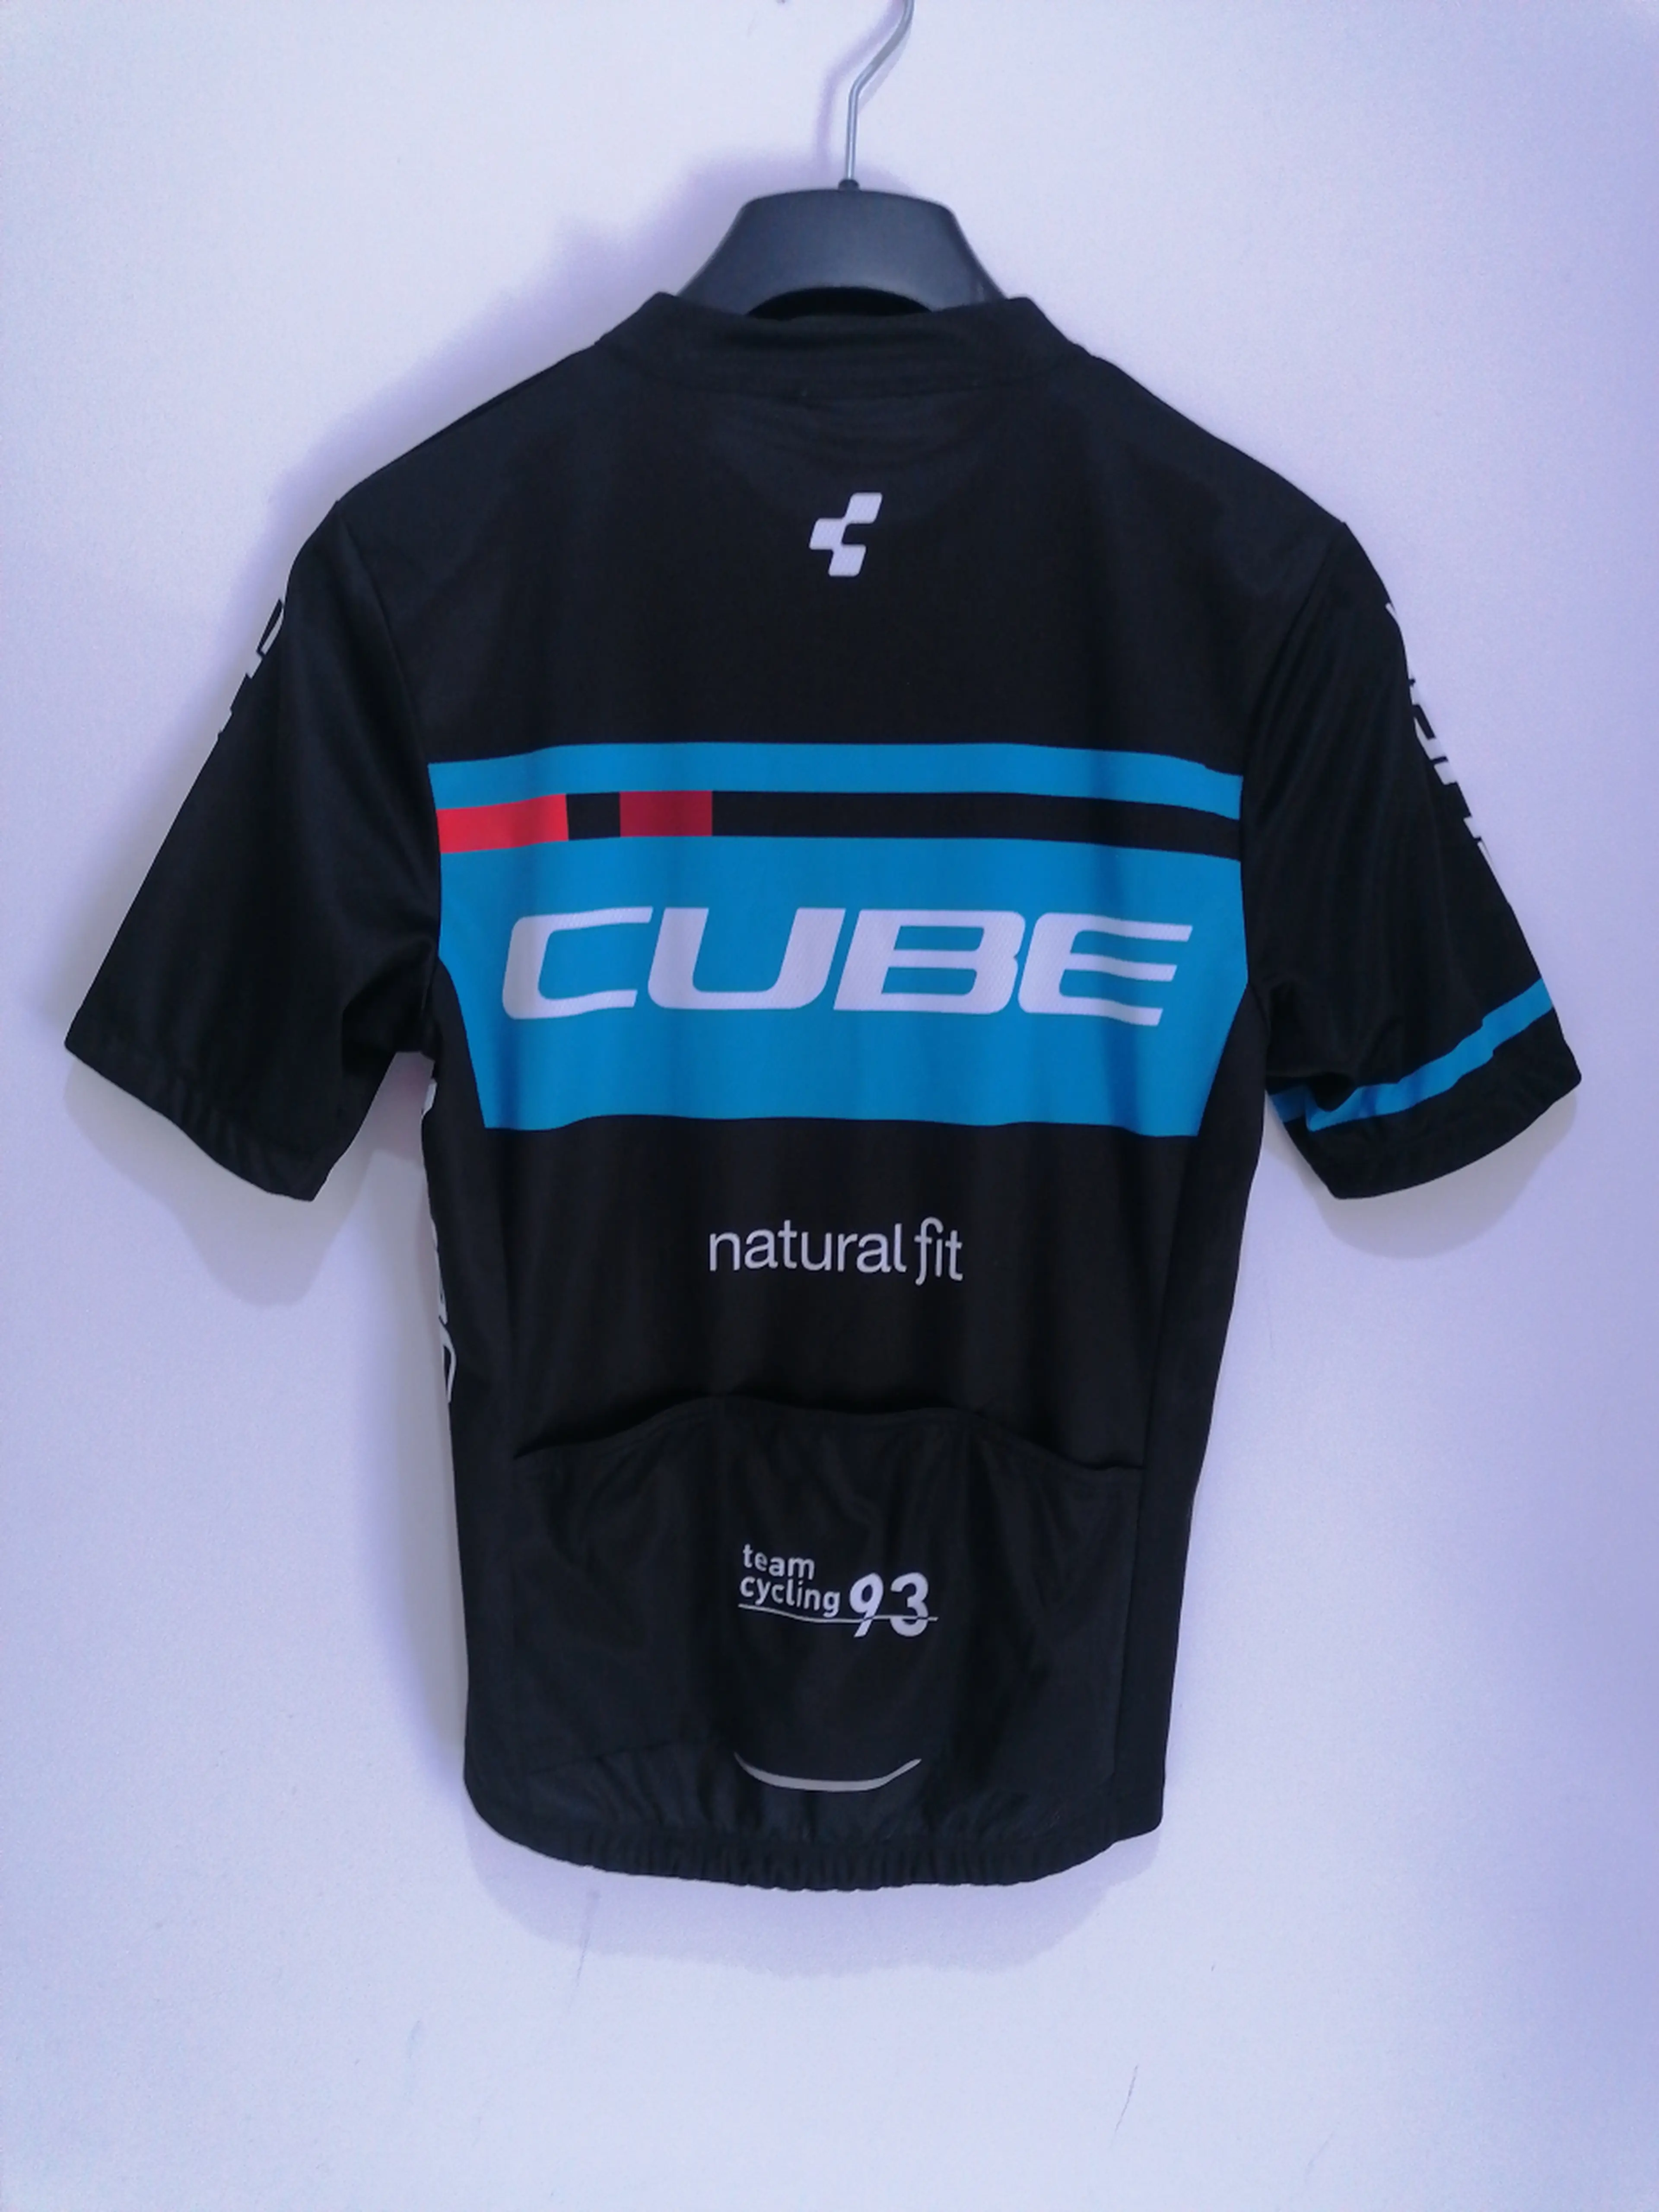 2. Cube Team Cycling 93 size S